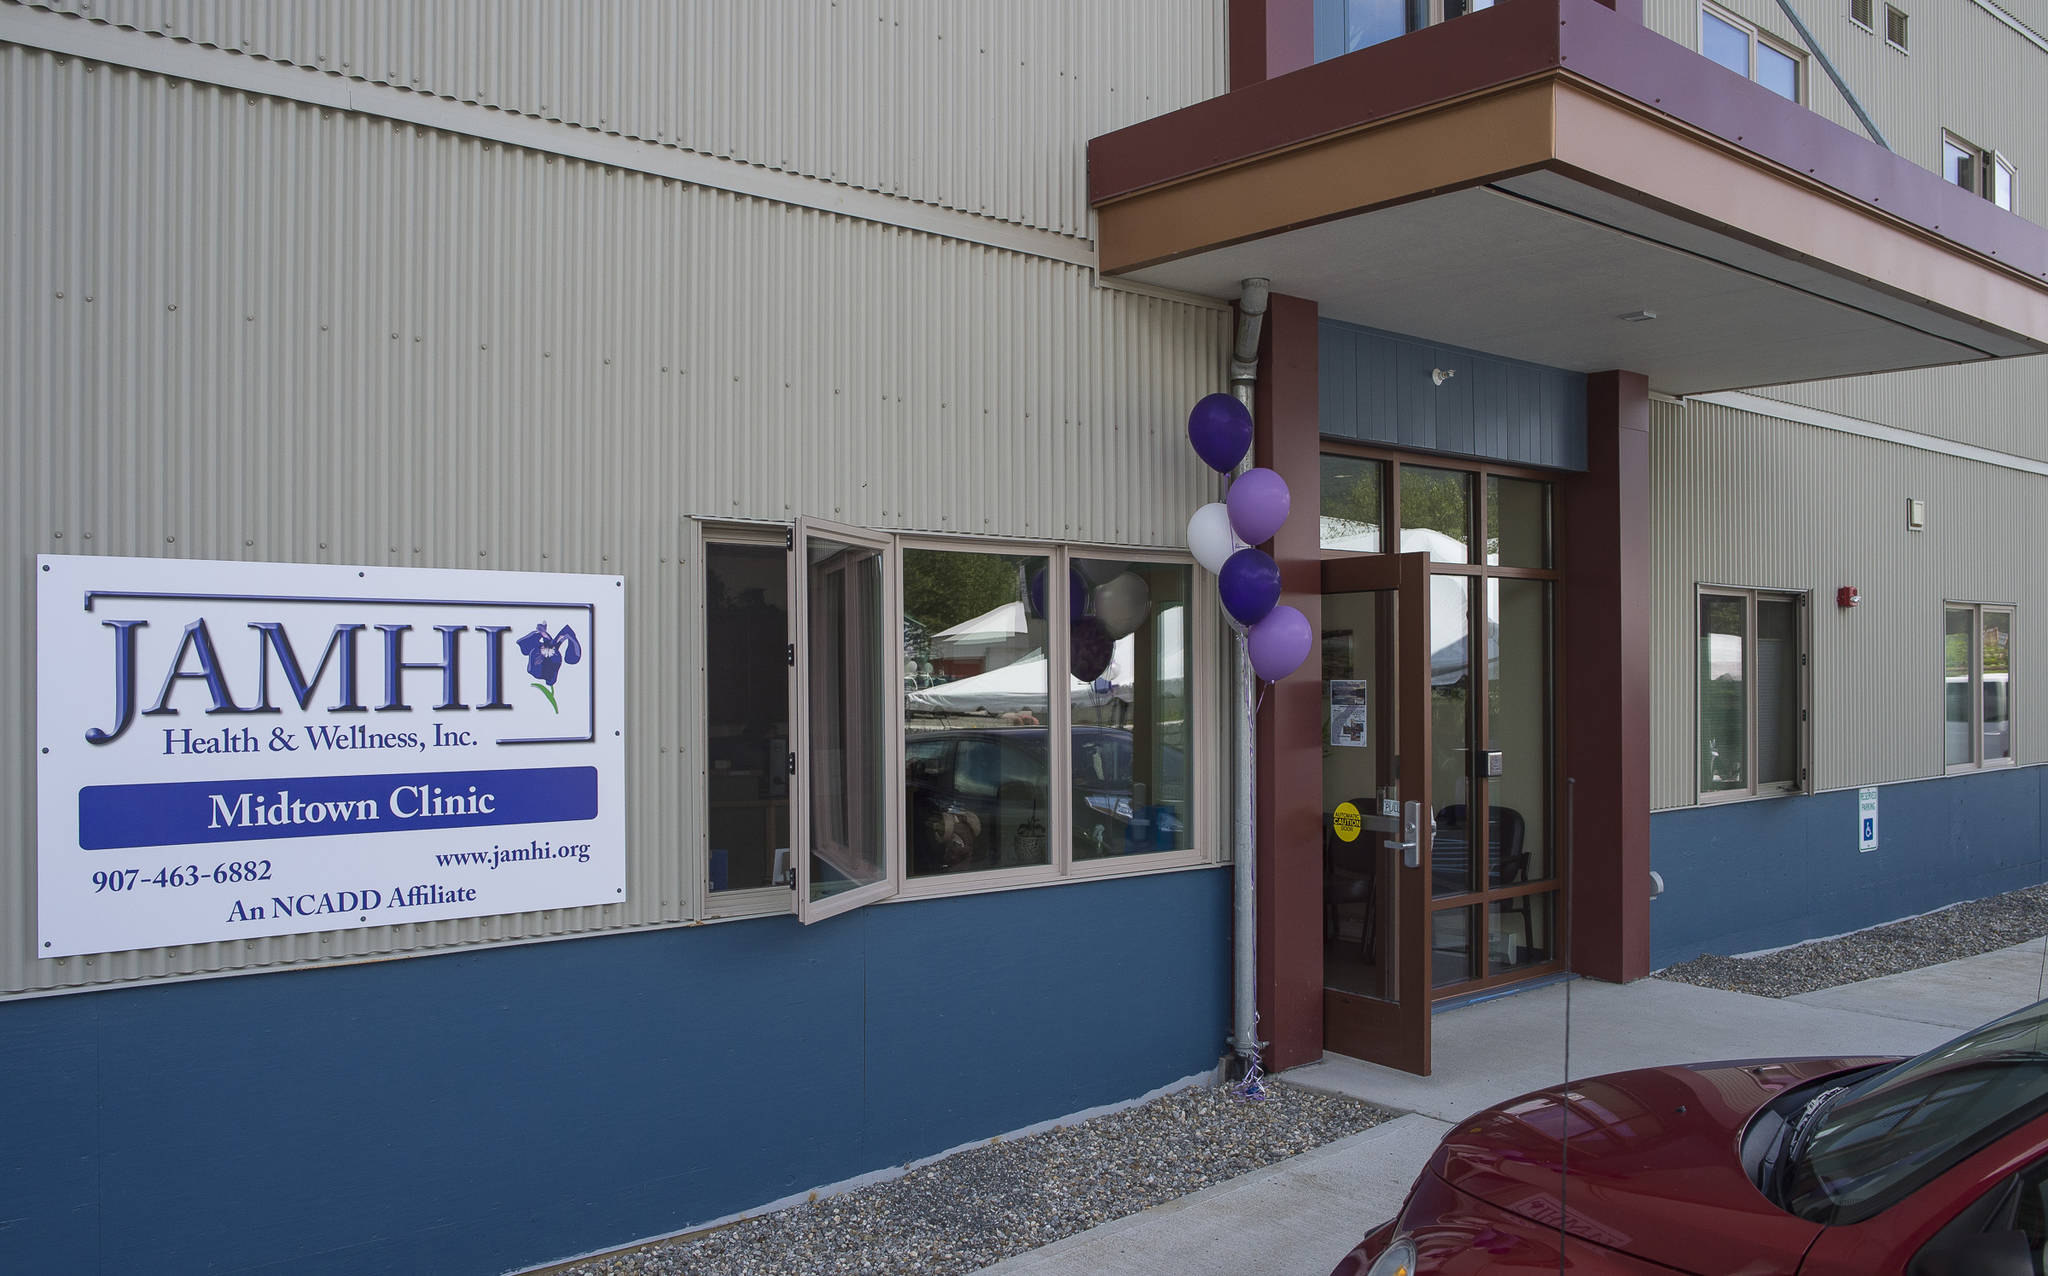 JAMHI Health & Wellness, Inc. celebrated their Midtown Clinic located at the House First Project with an open house on Friday, June 22, 2018. (Michael Penn | Juneau Empire)